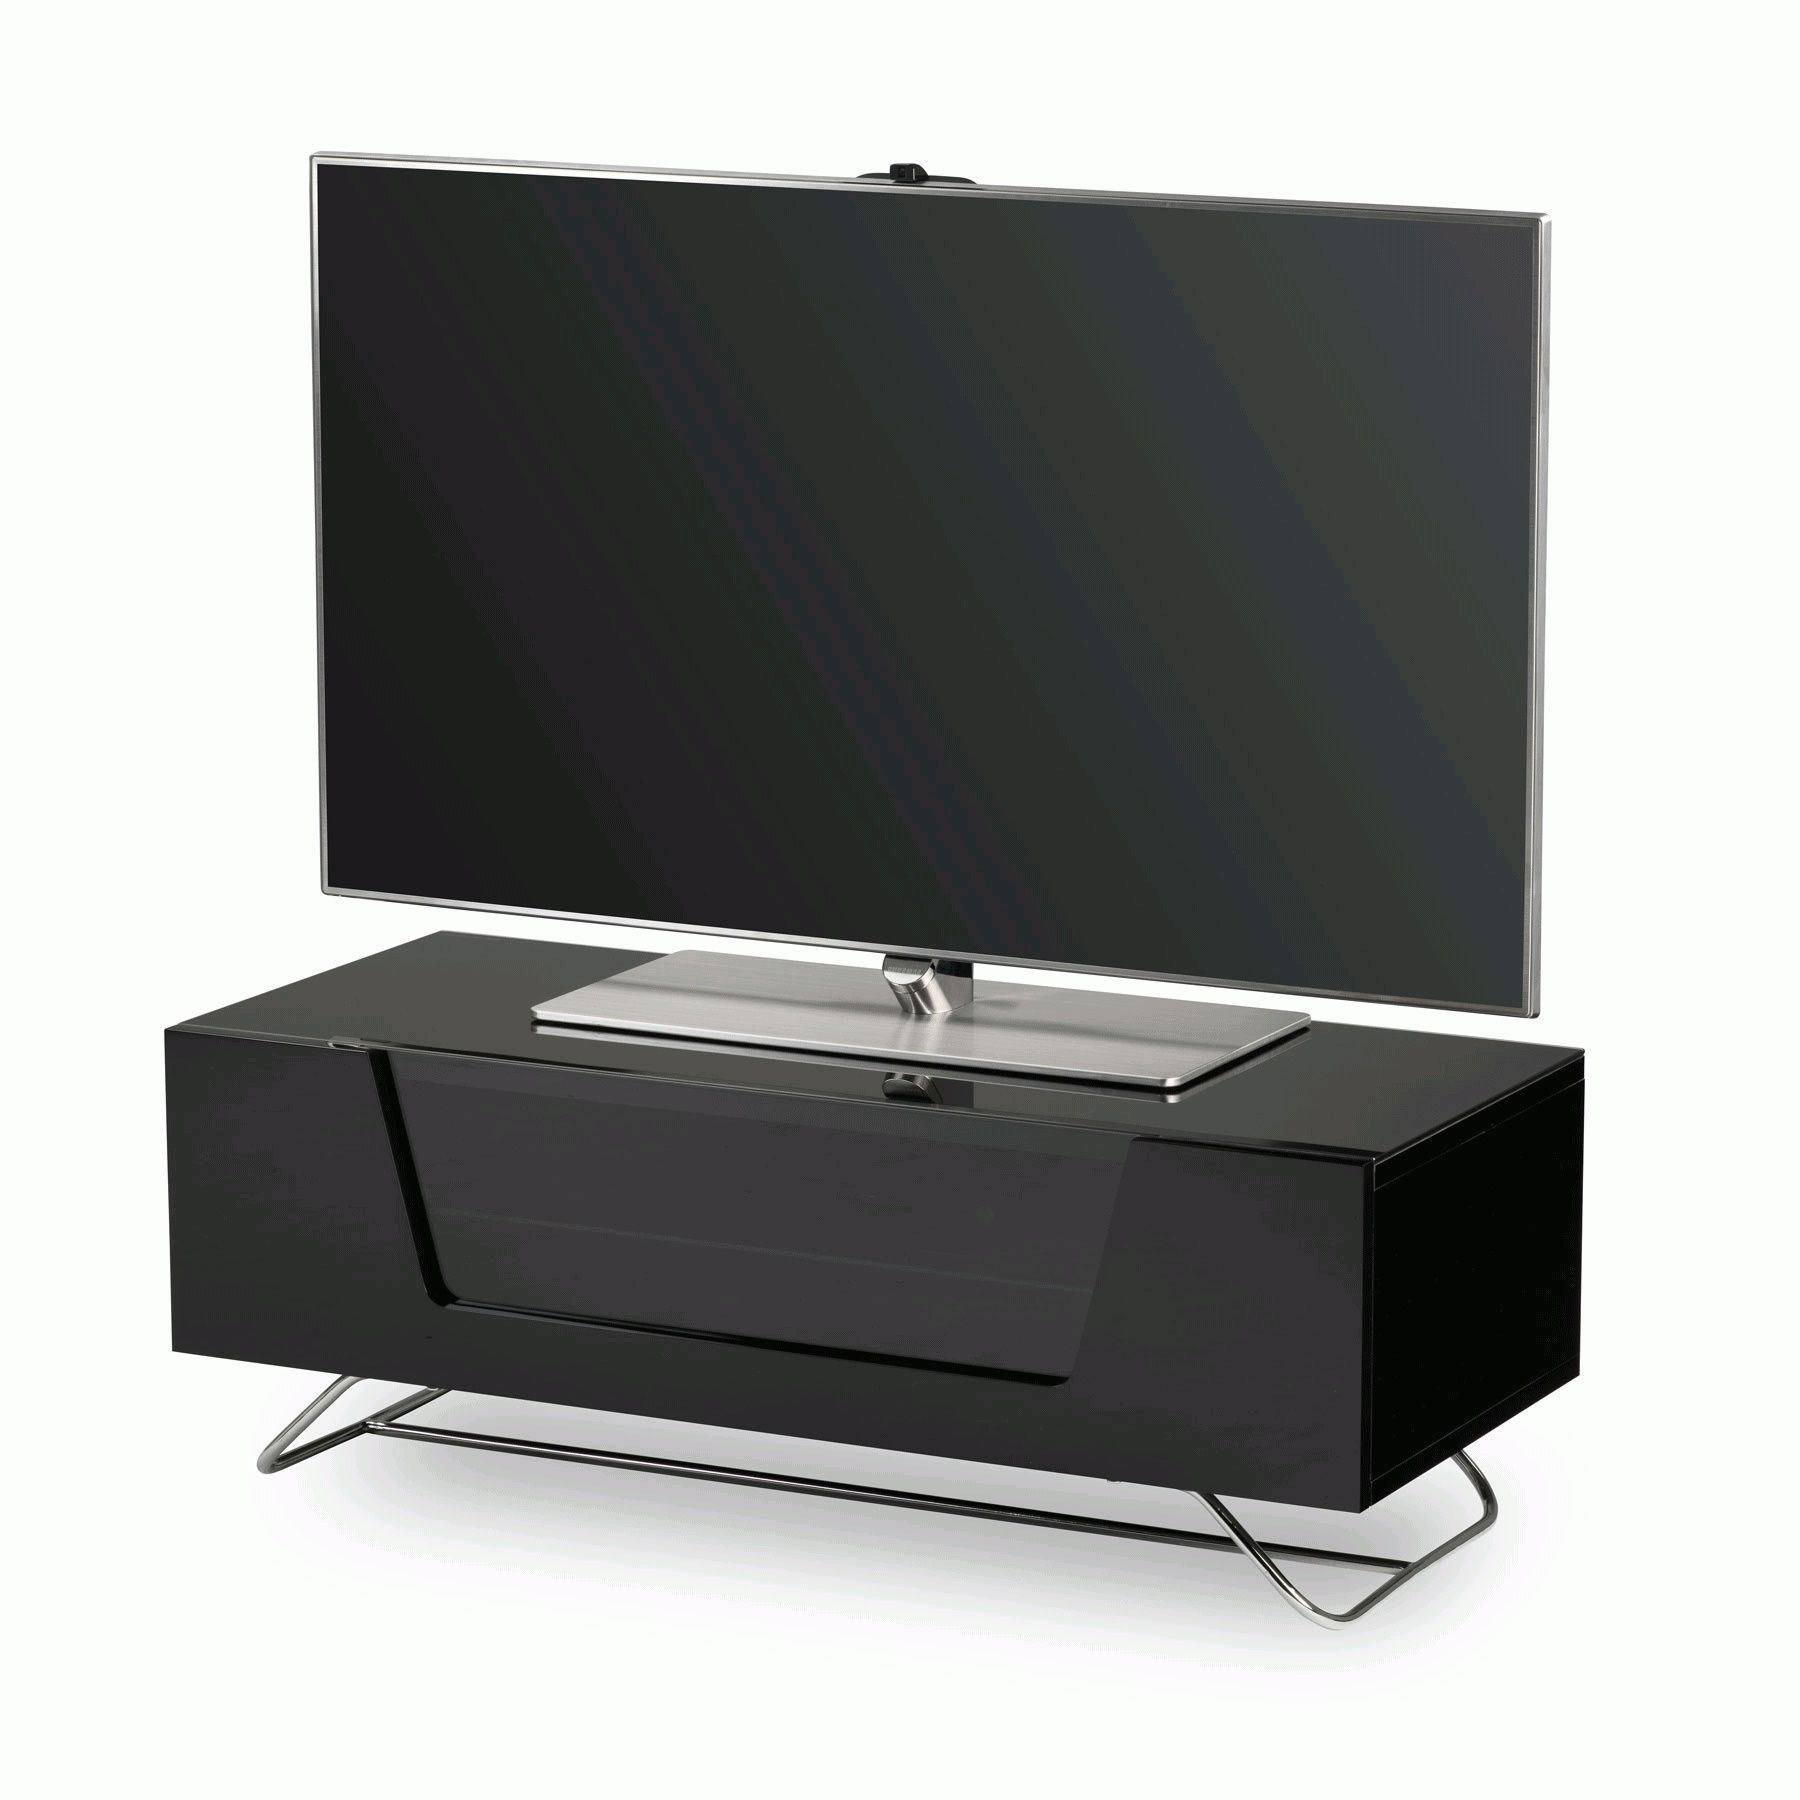 Alphason Chromium 2 100cm Black Tv Stand For Up To 50" Tvs For Tv Stands For Tvs Up To 50" (Gallery 18 of 20)